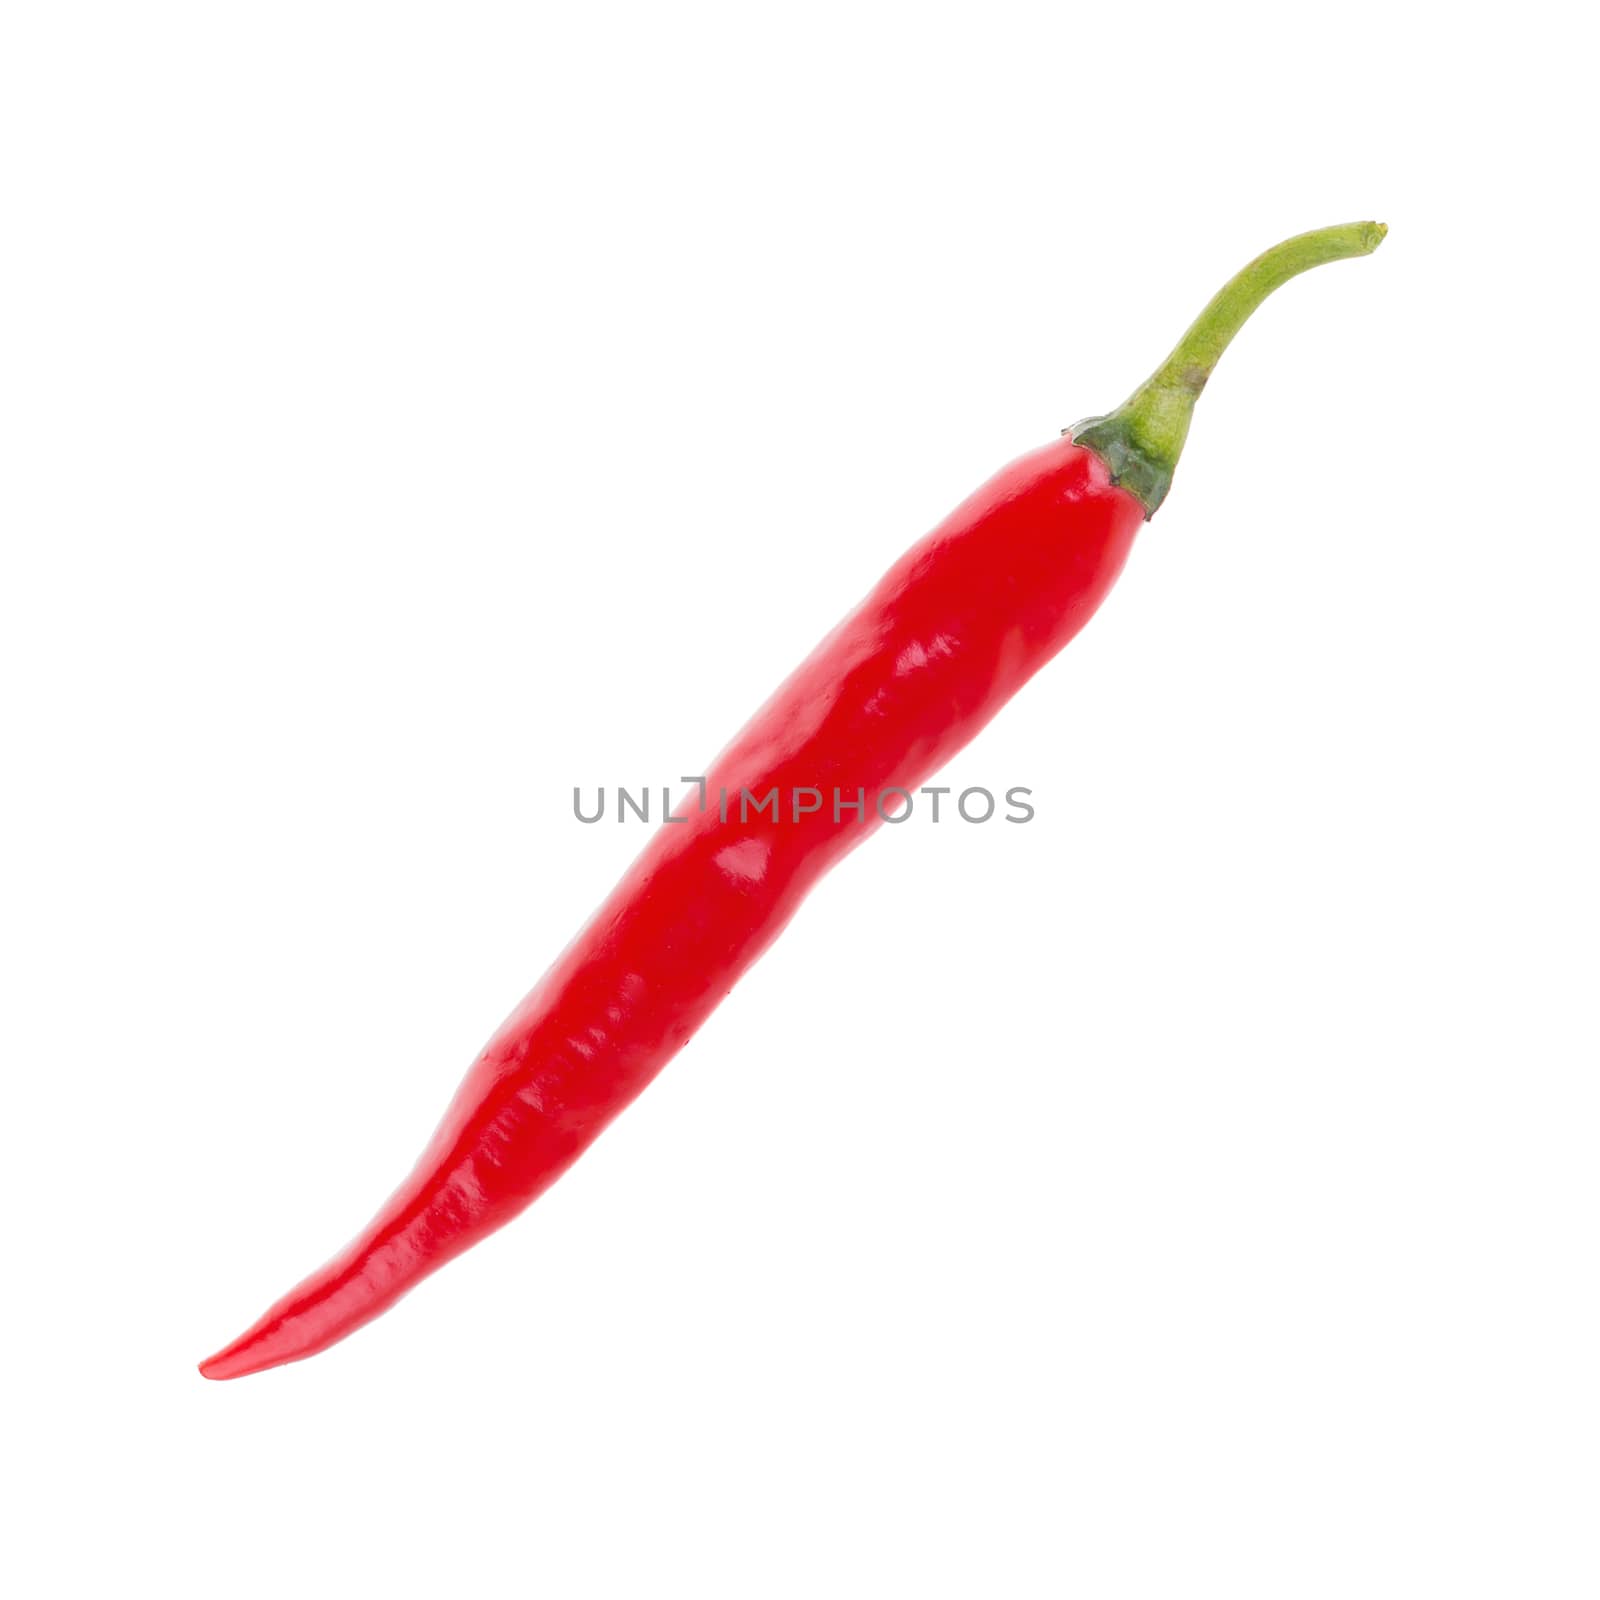 Red chili pepper isolated on a white background by kaiskynet